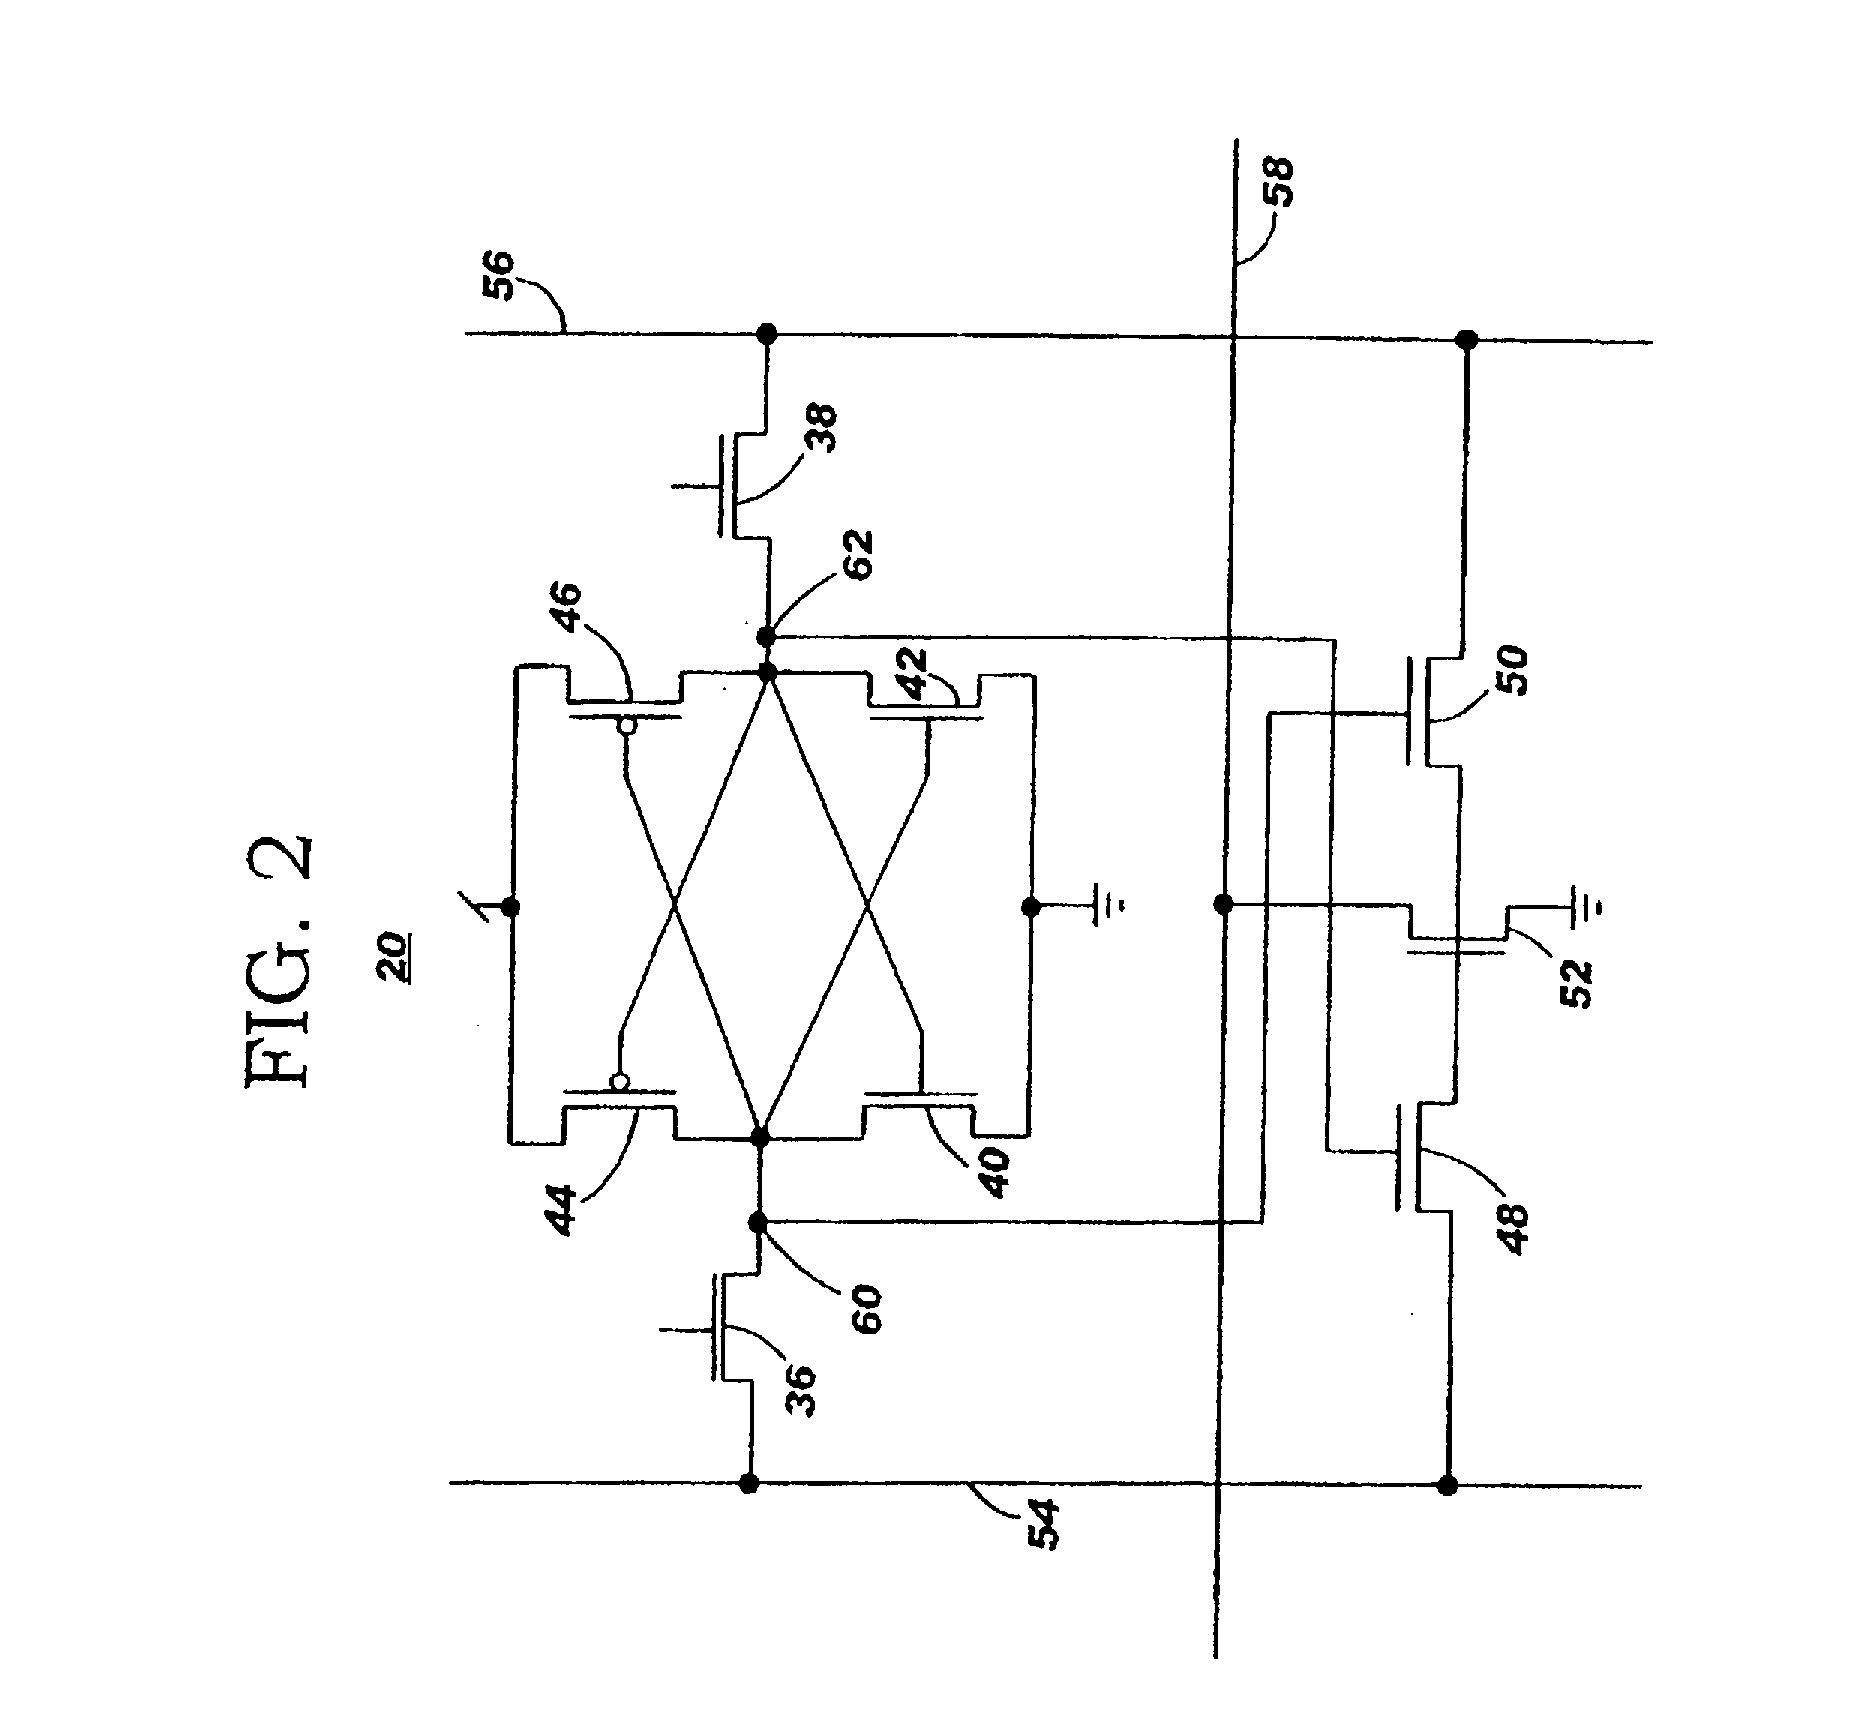 Design structure for content addressable memory